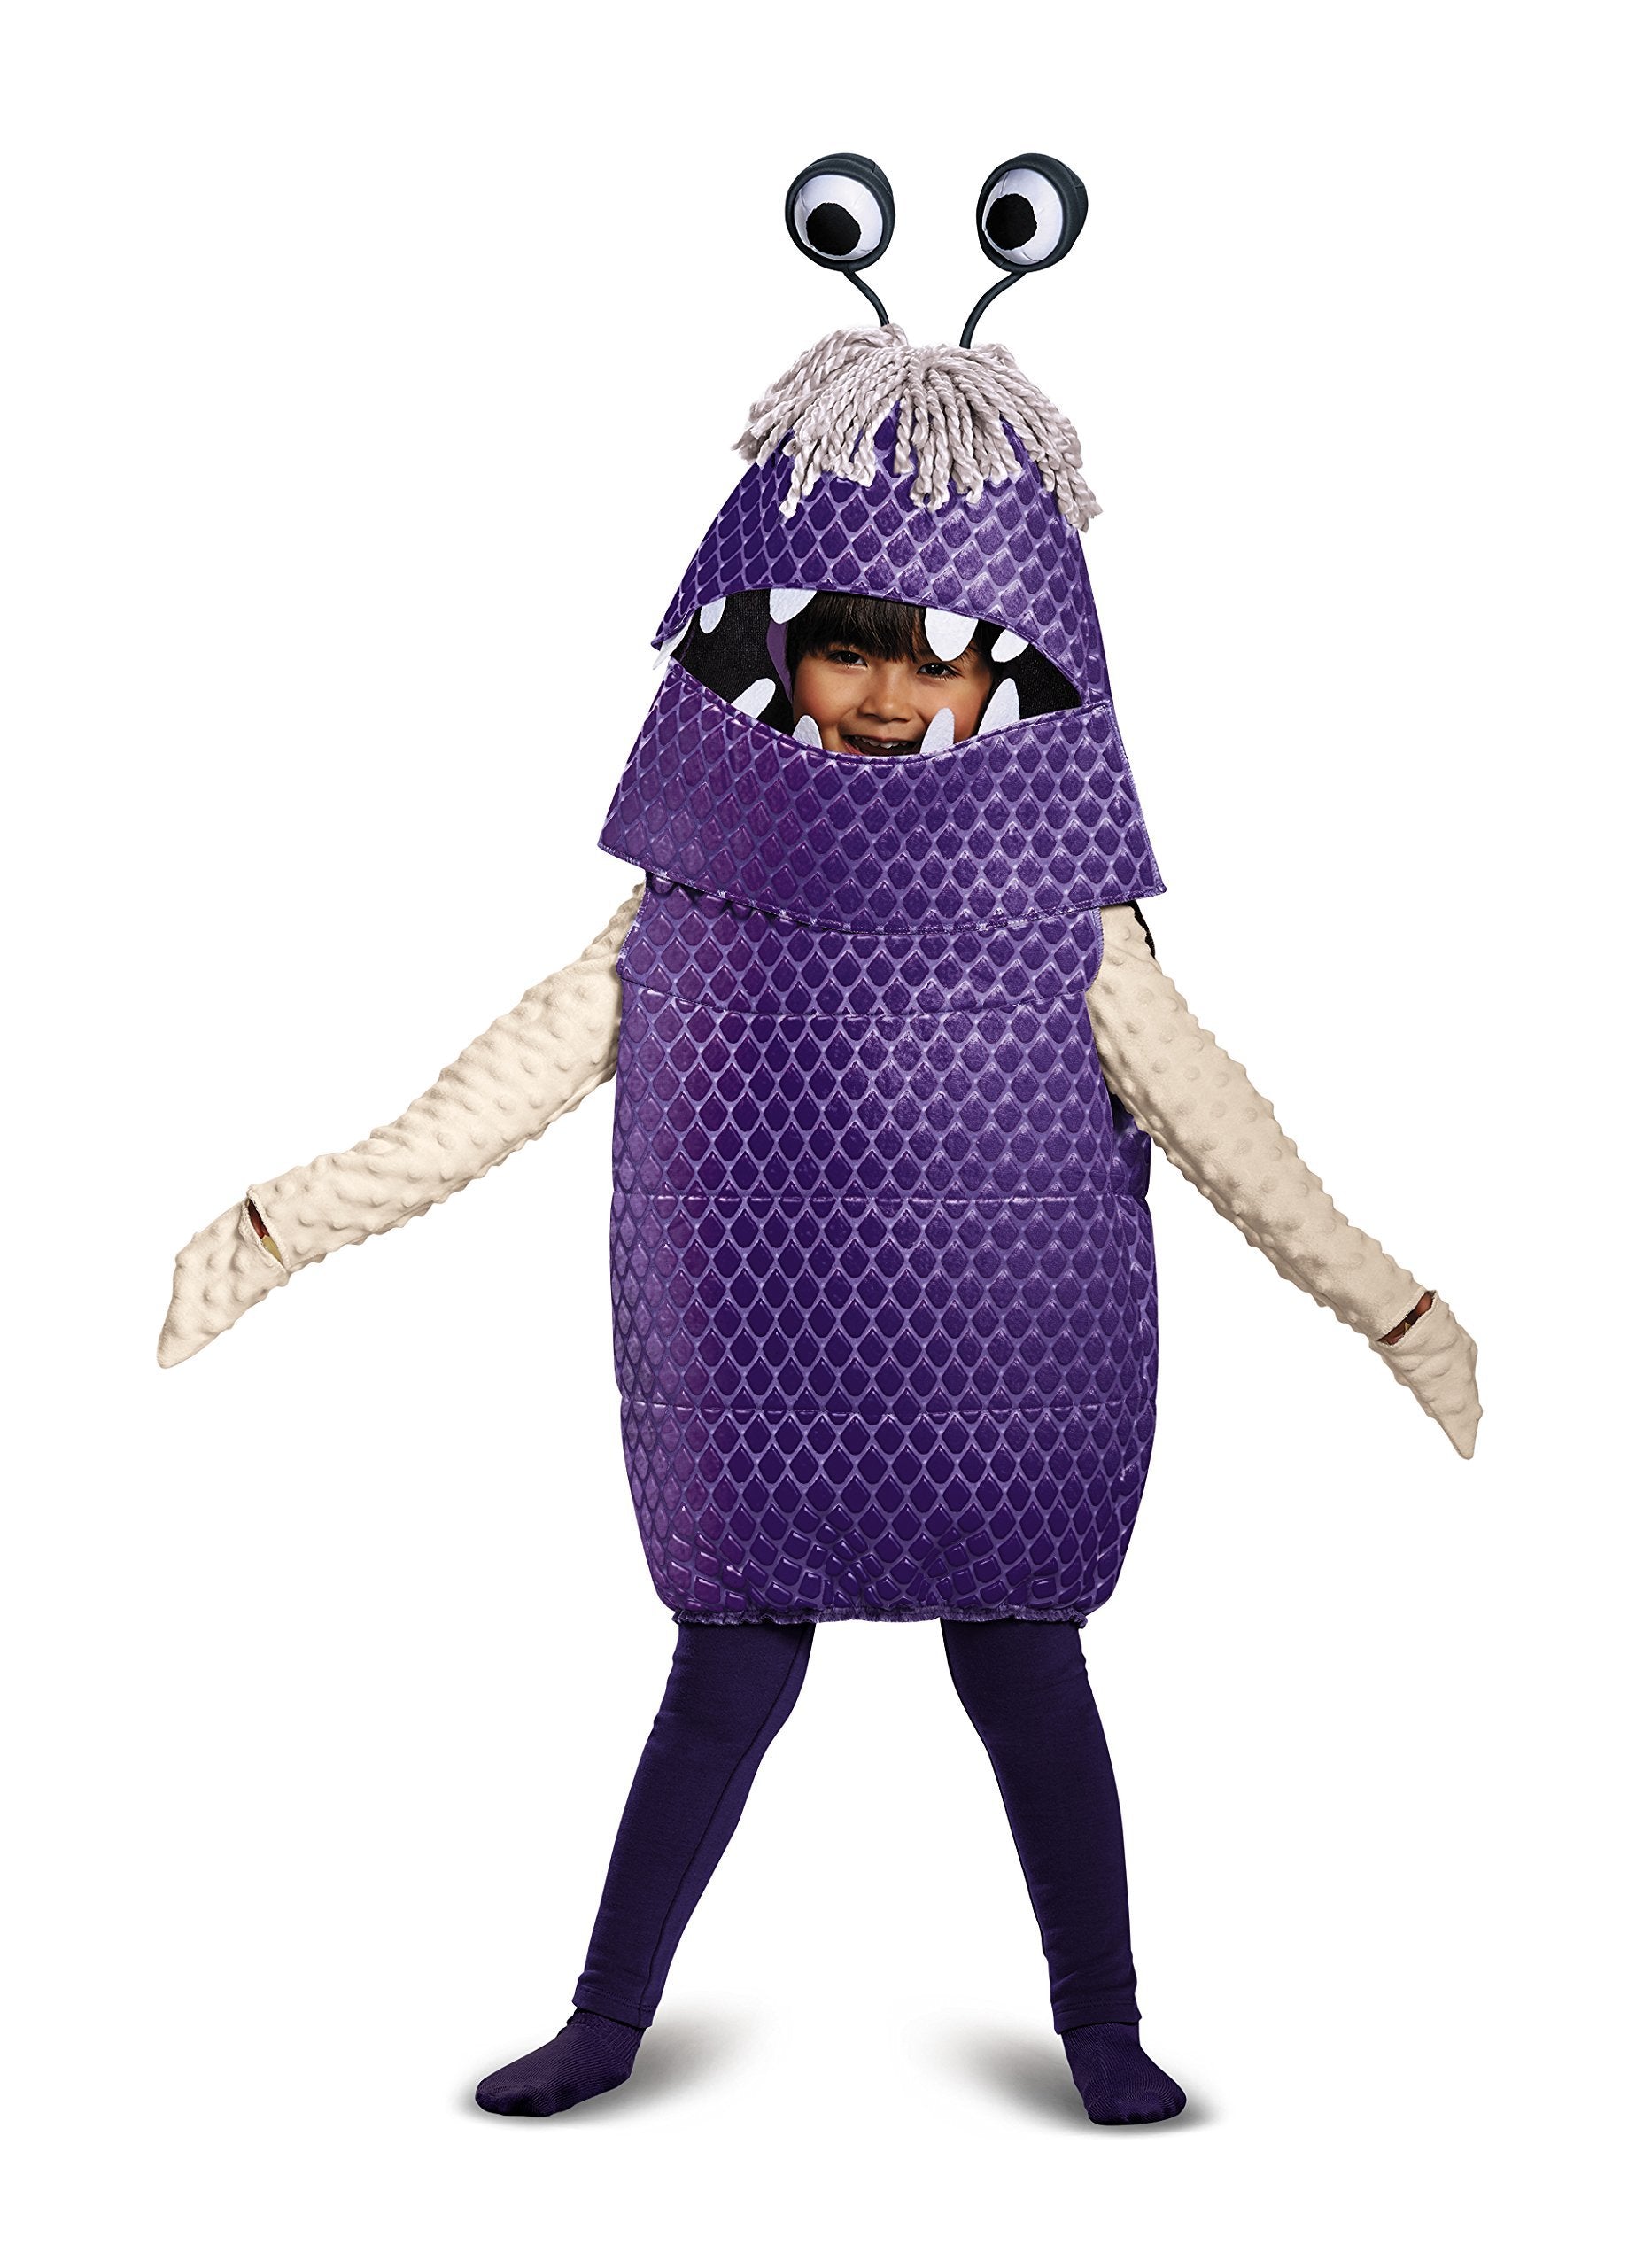 Boo Deluxe Toddler Costume Purple - Size Small (2T) - Free Shipping and Returns